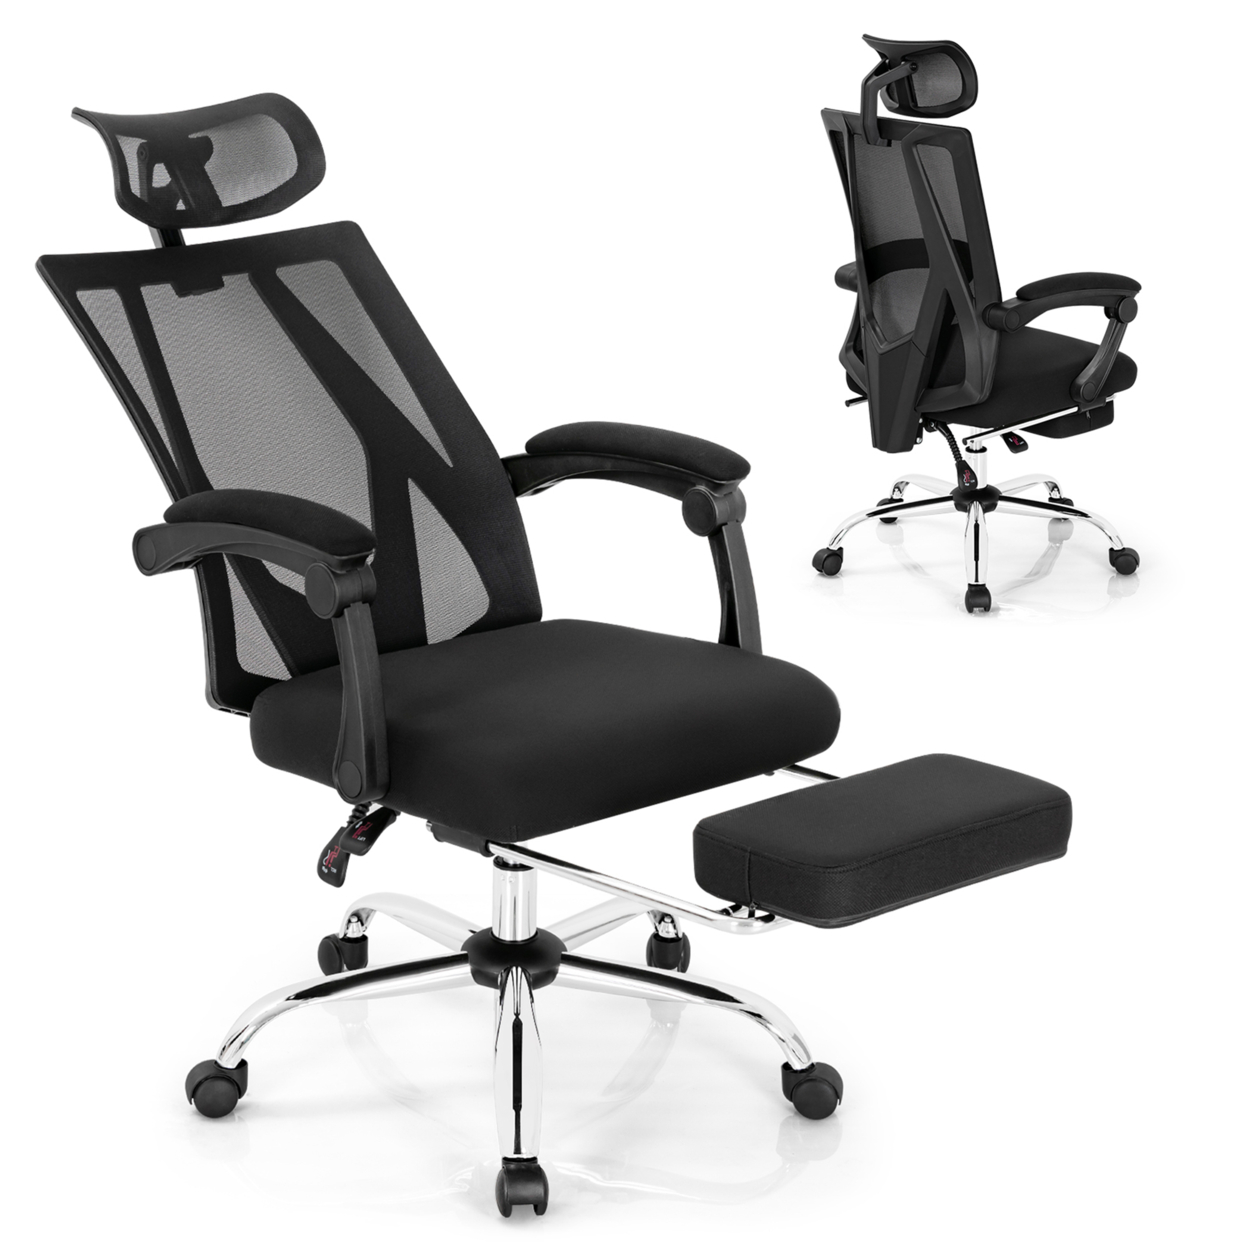 High Back Office Chair Mesh Reclining Executive Chair W/ Retractable Footrest